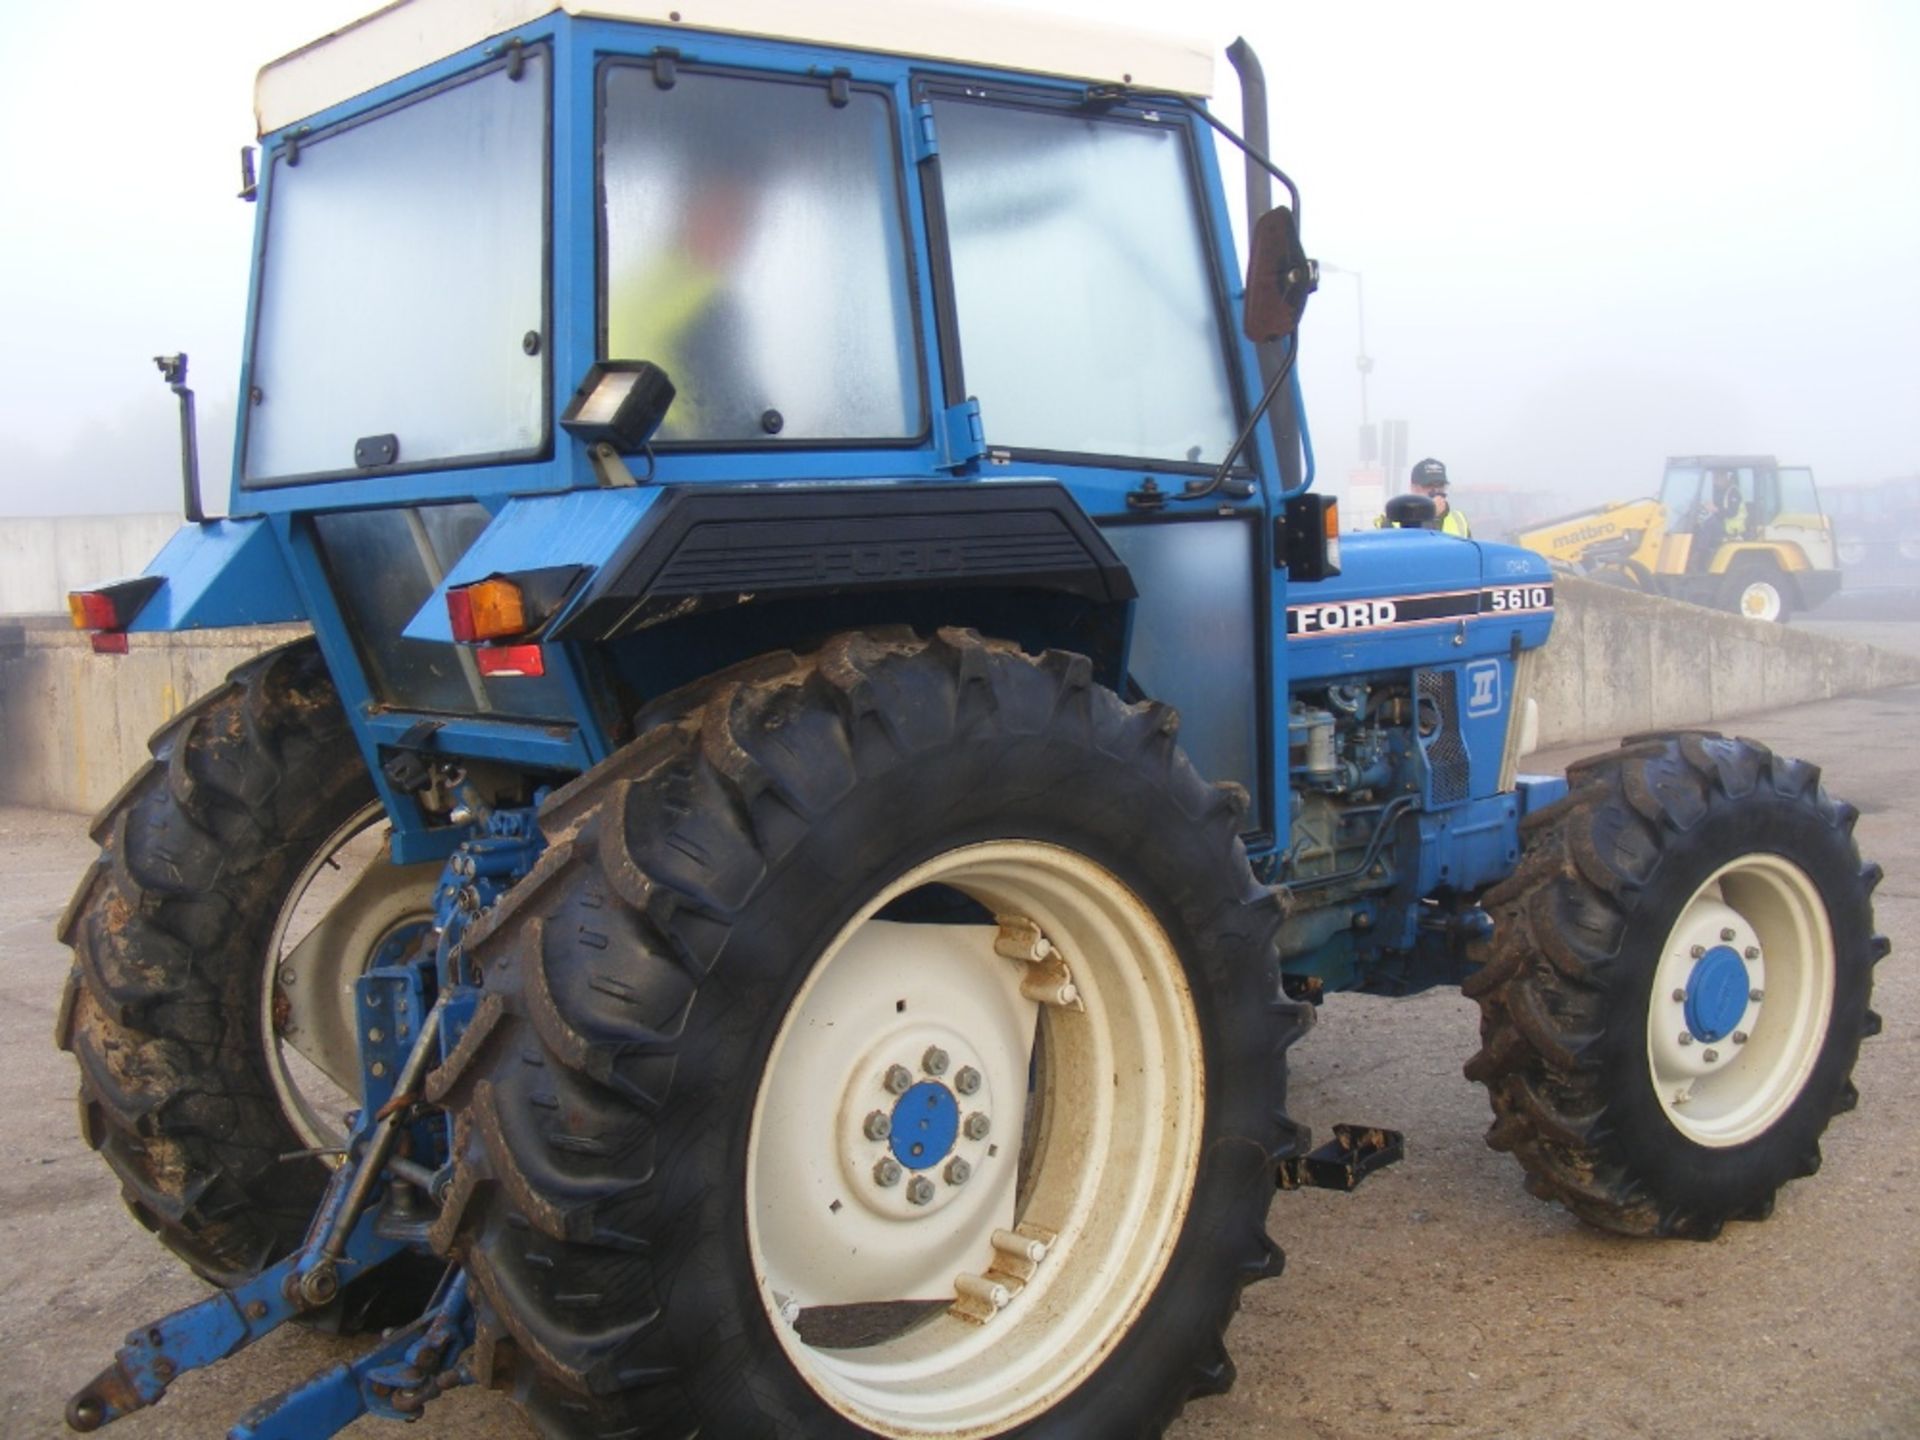 Ford 5610 Force II 4wd Tractor with AP Cab - Image 5 of 6